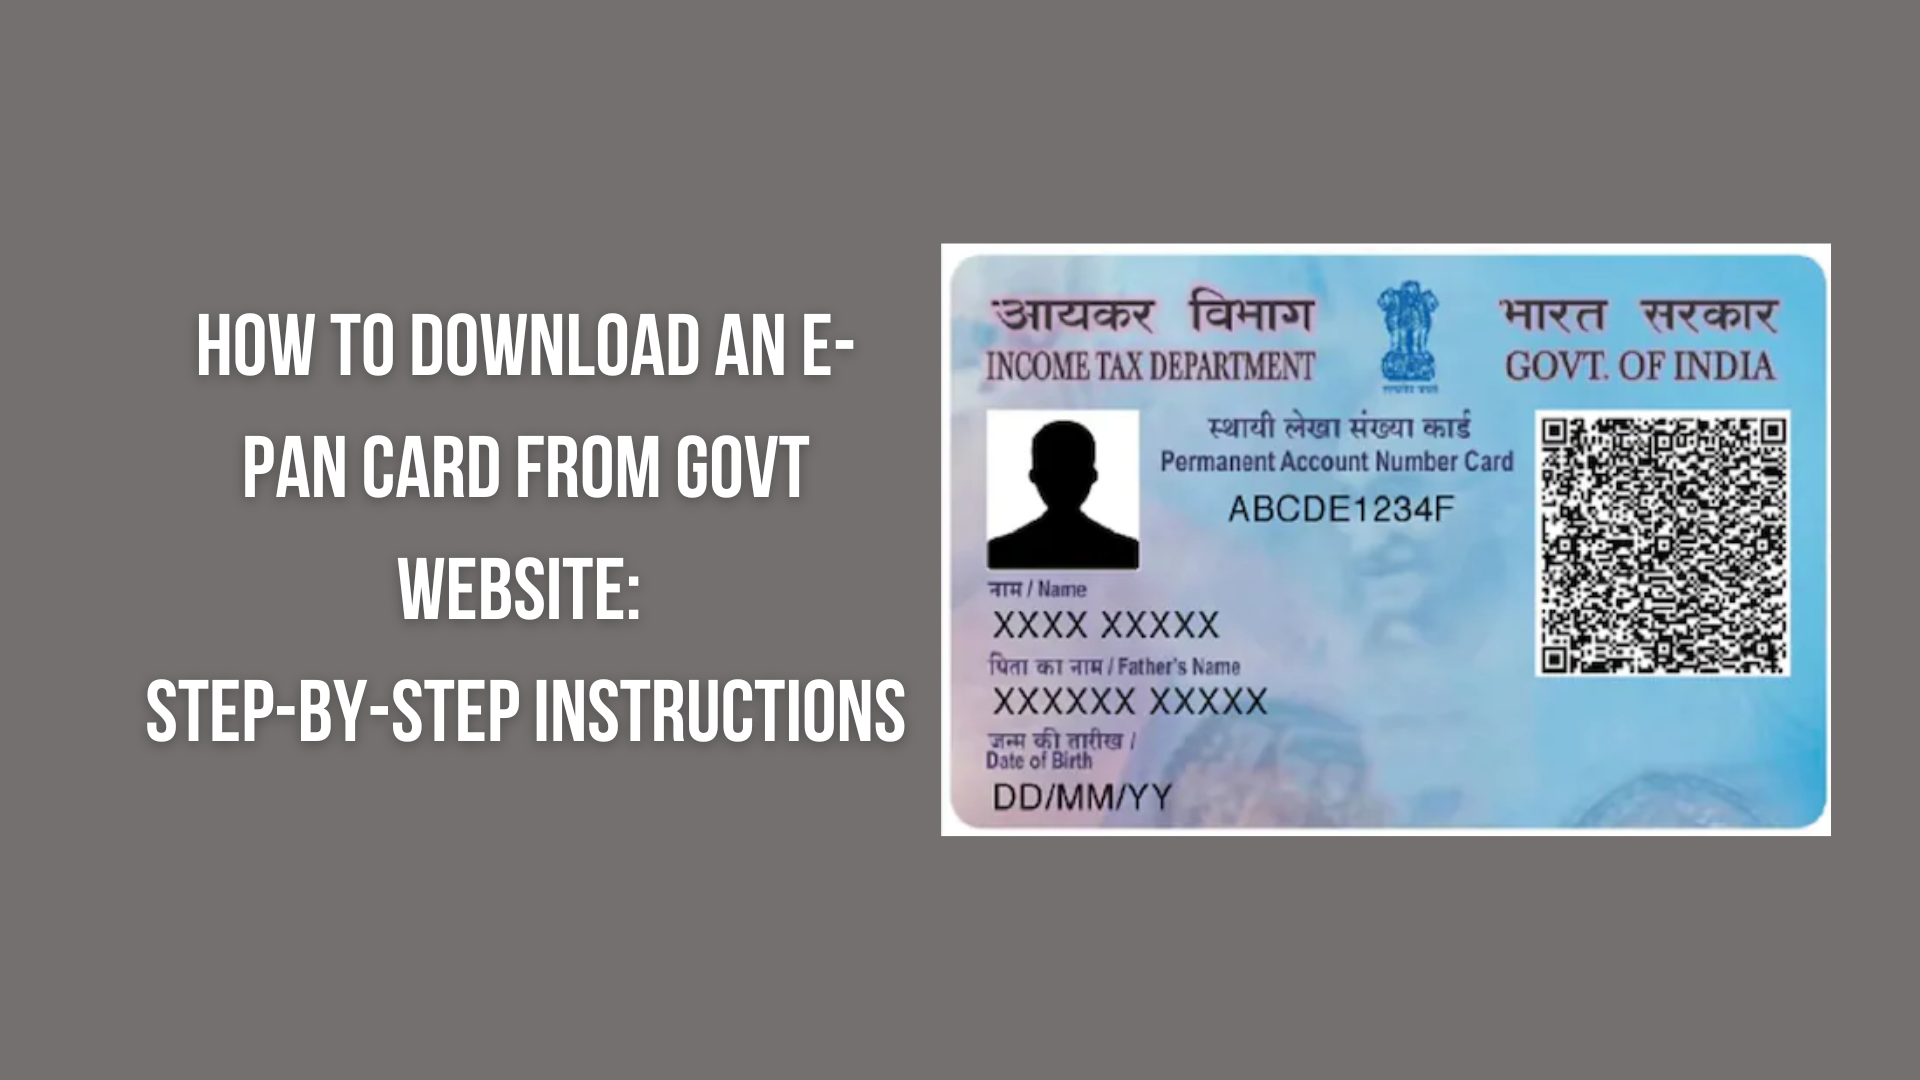 How To Download an e-PAN Card from Govt website: Step-by-step instructions